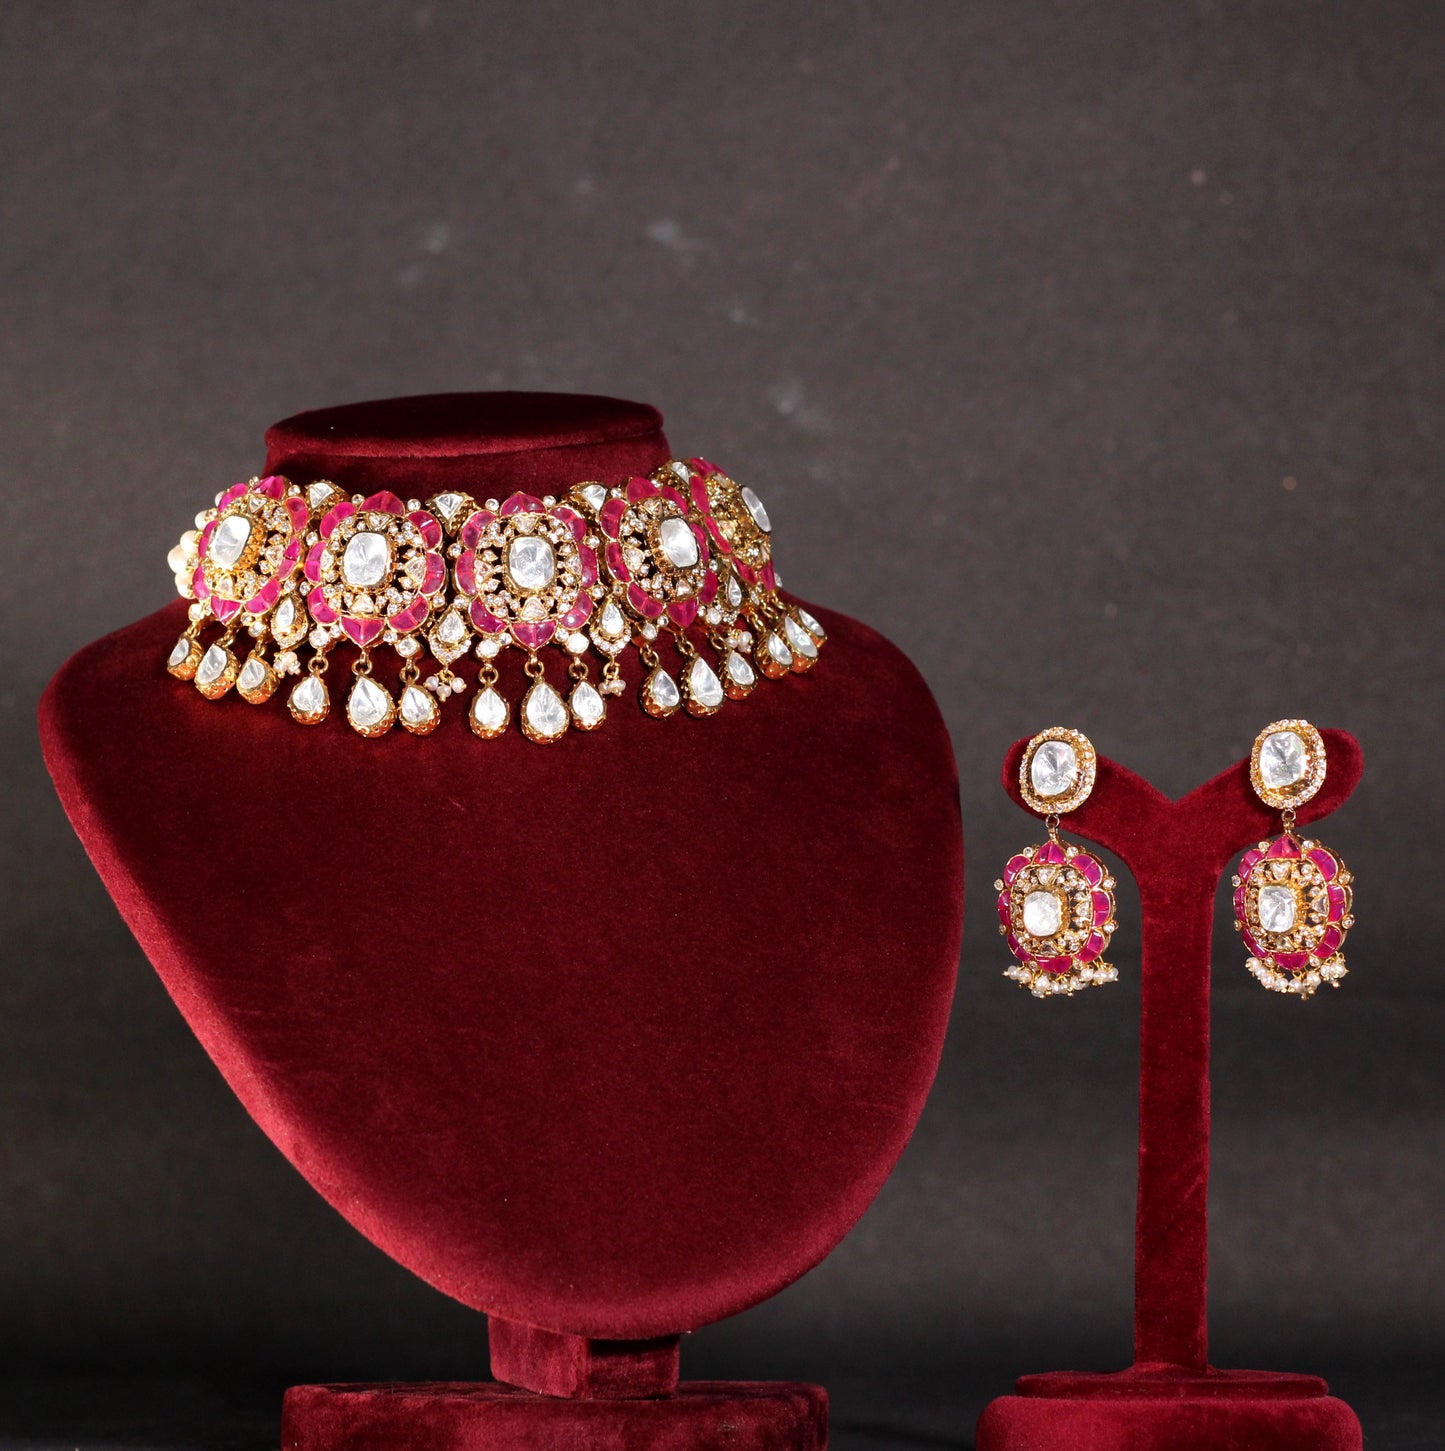 NECKLACE AND EARRING IN 92.5 STERLING SILVER IN 18KT GOLD PLATED WITH MOSONITE POLKI AND RUBY  STONE WITH ZIRCONIA